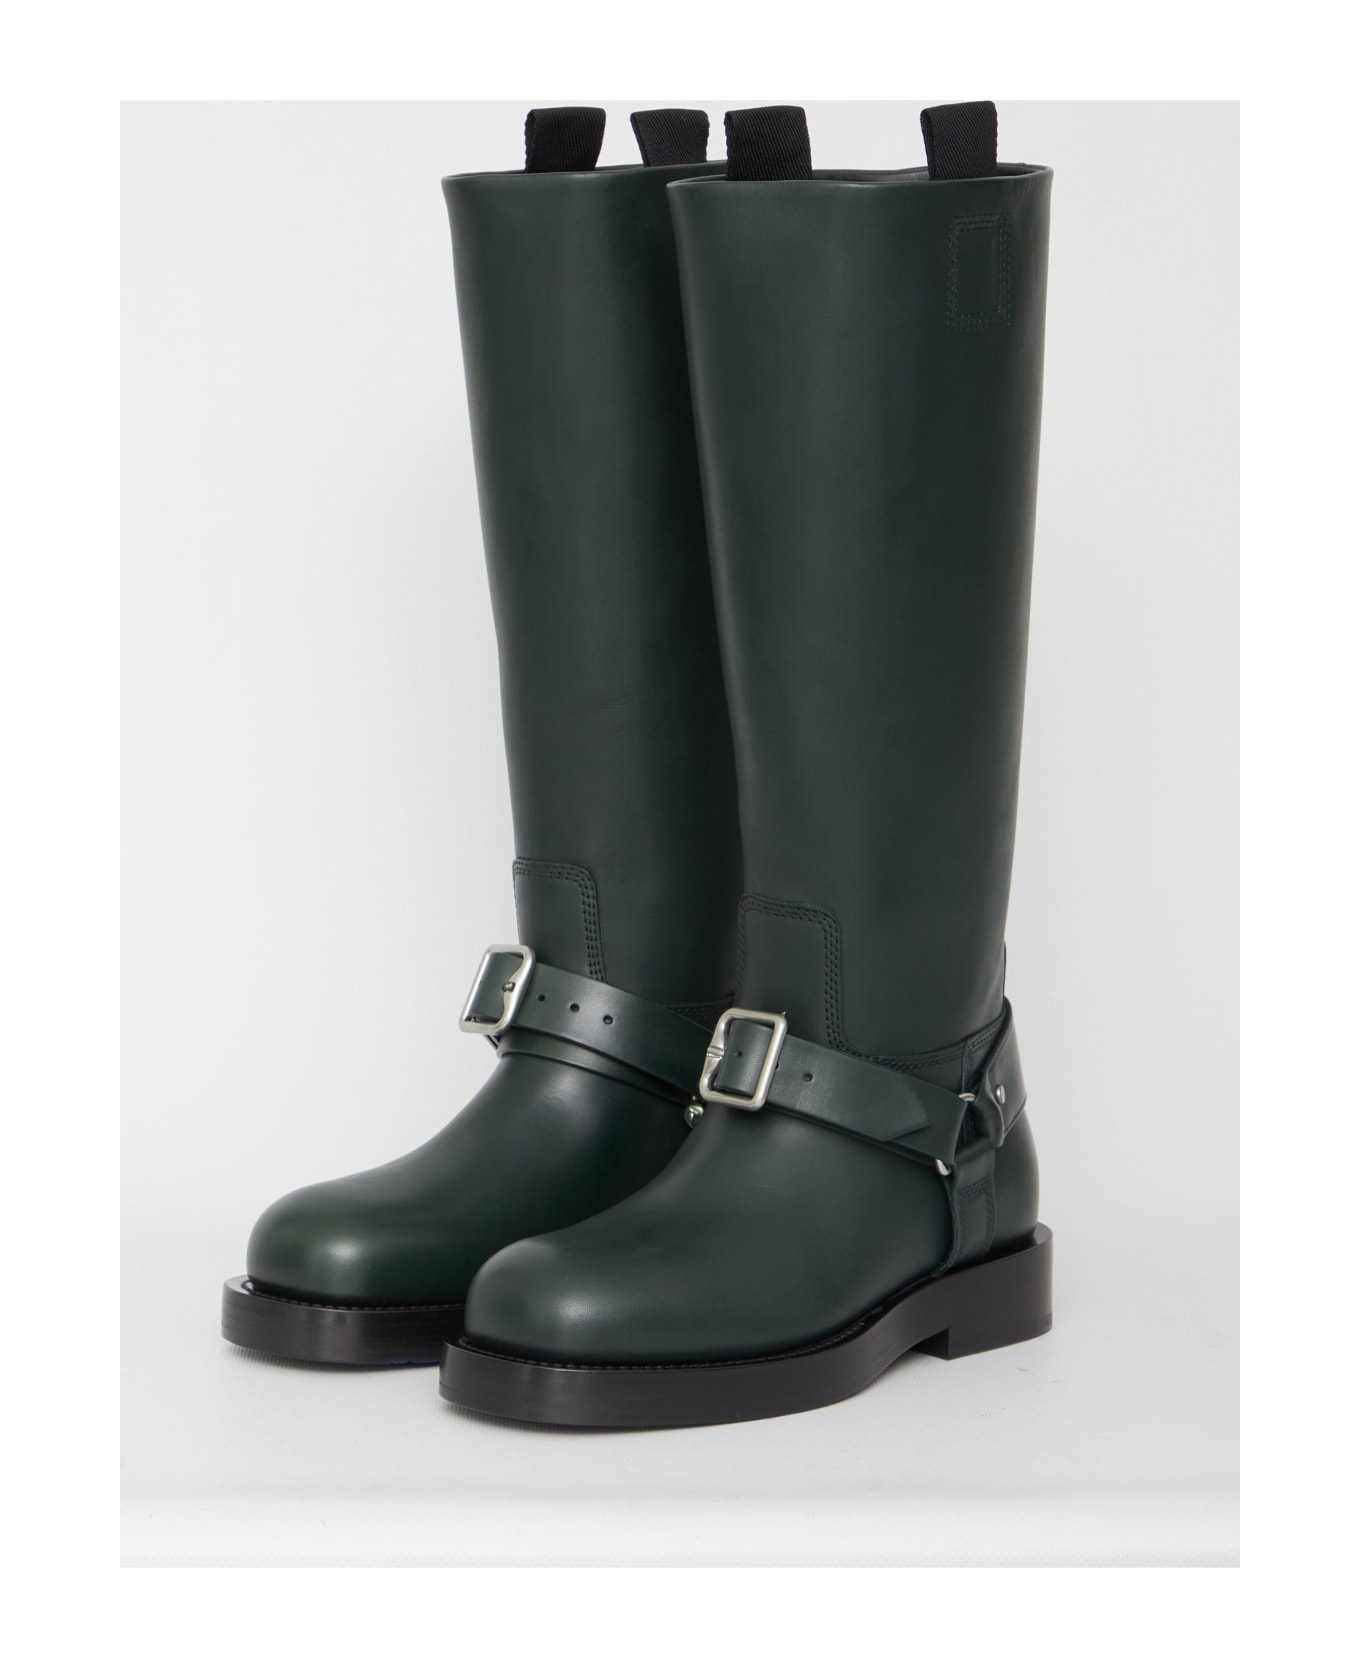 Burberry Saddle High Boots - GREEN ブーツ